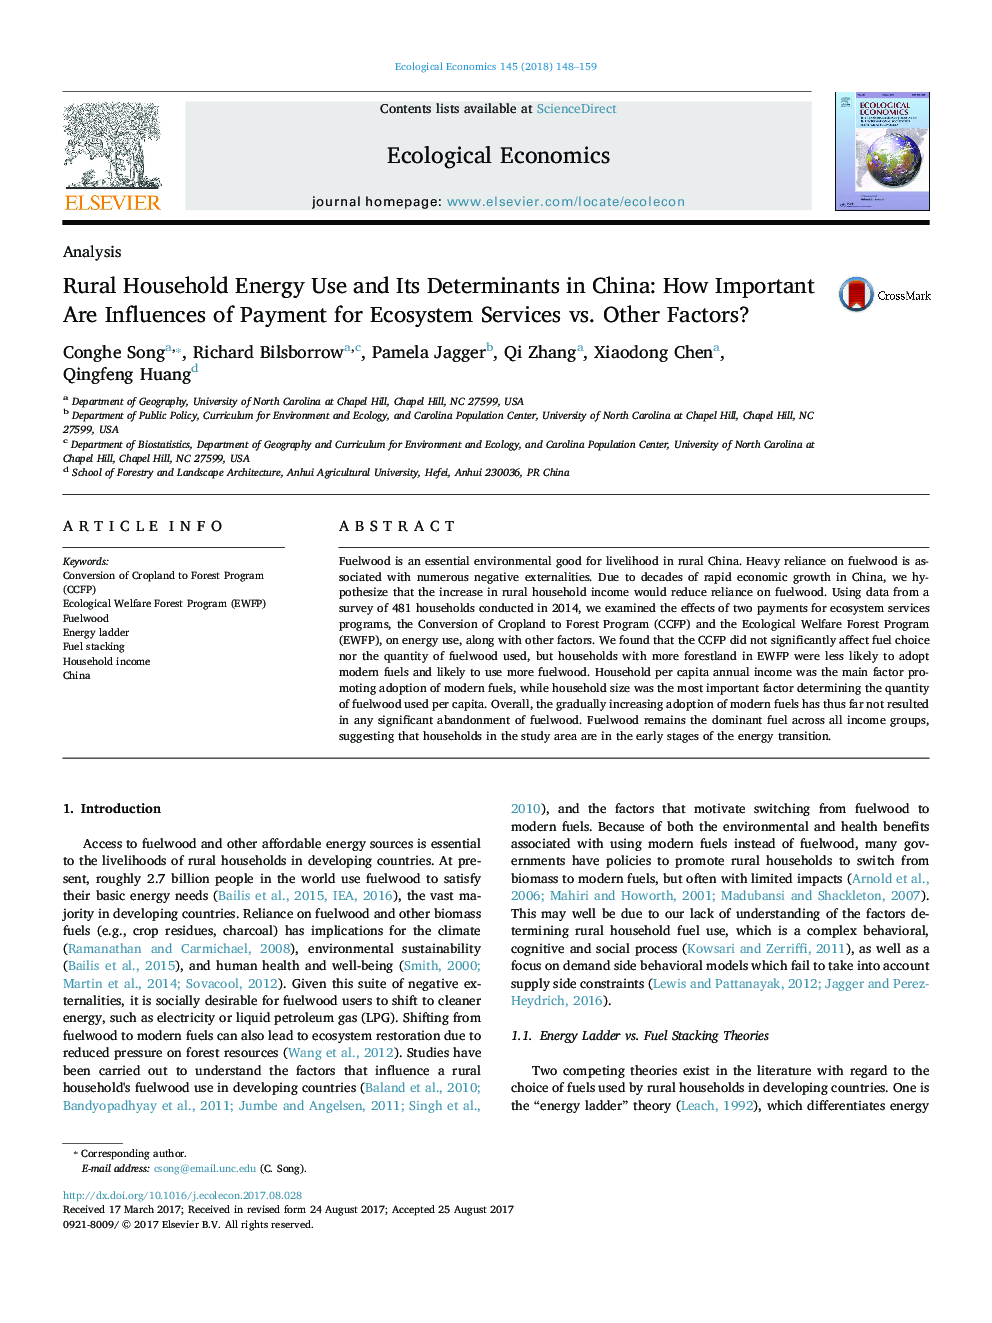 AnalysisRural Household Energy Use and Its Determinants in China: How Important Are Influences of Payment for Ecosystem Services vs. Other Factors?